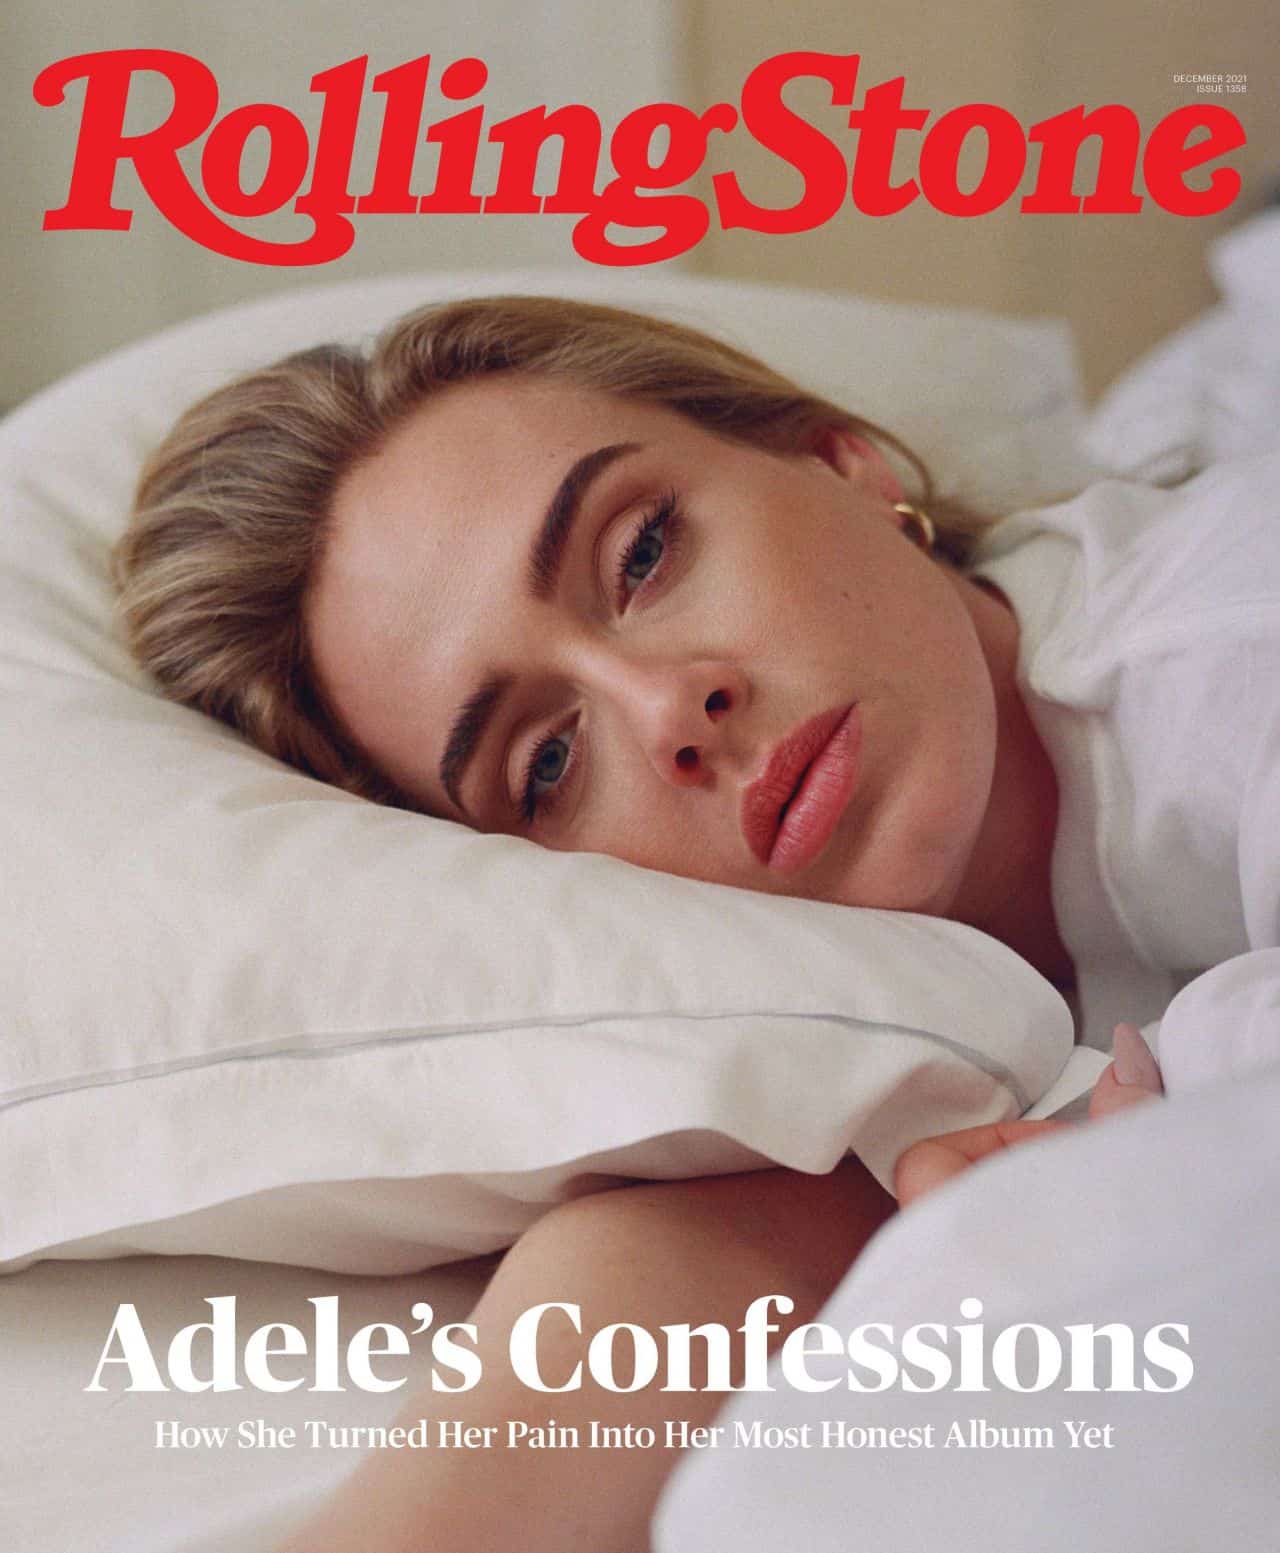 Adele Posed for the Latest Issue of Rolling Stone Magazine, December 2021